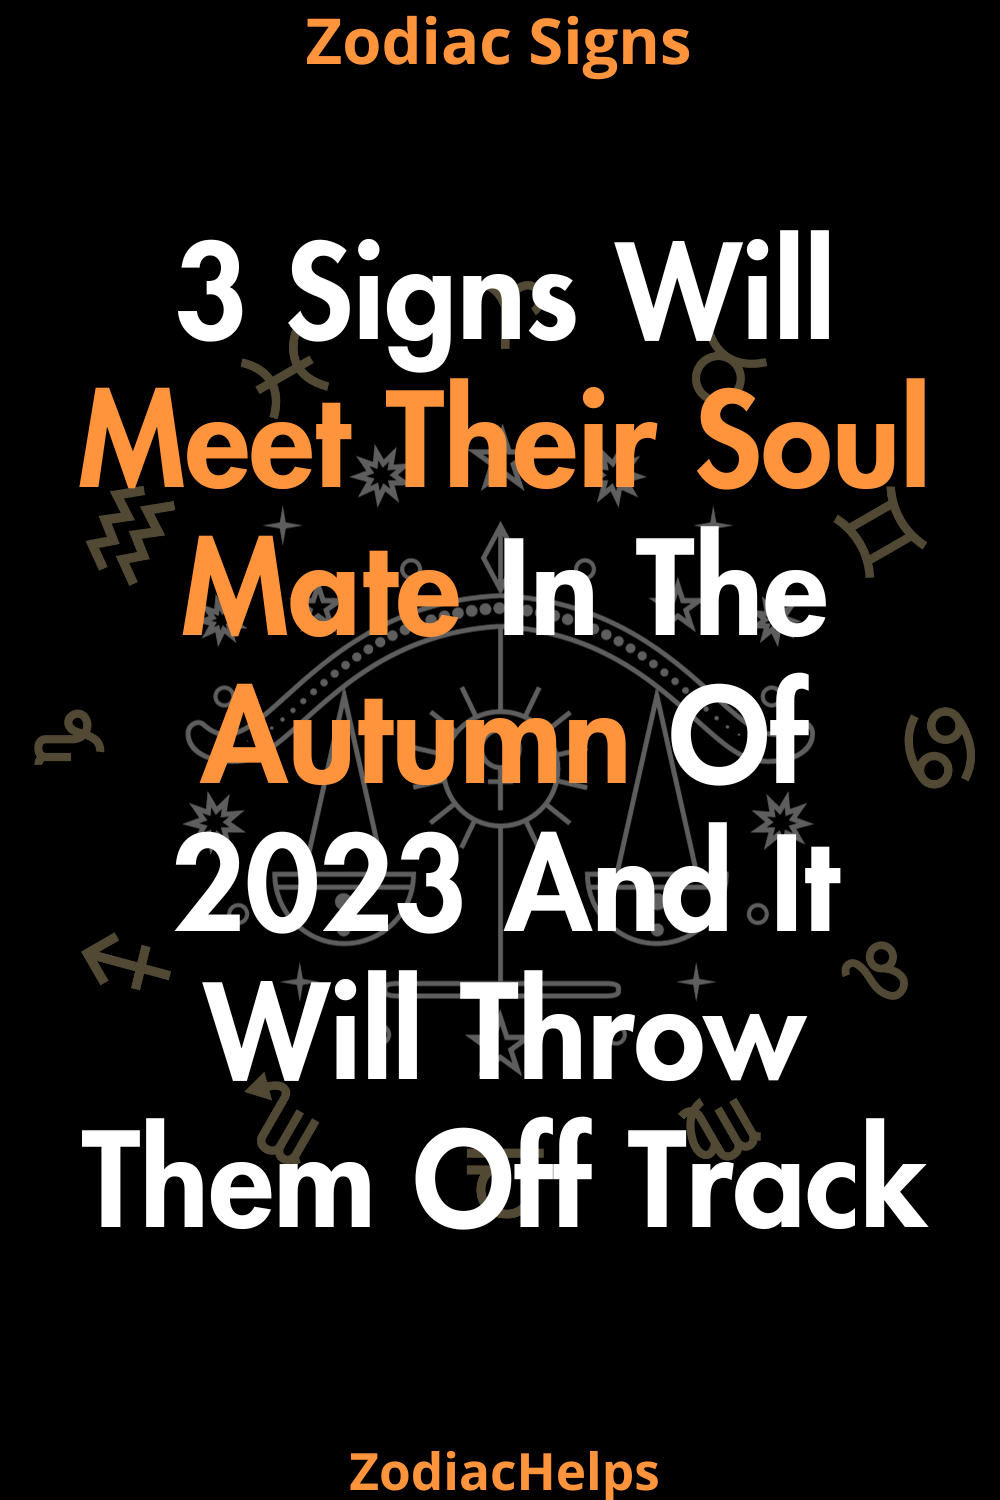 3 Signs Will Meet Their Soul Mate In The Autumn Of 2023 And It Will Throw Them Off Track